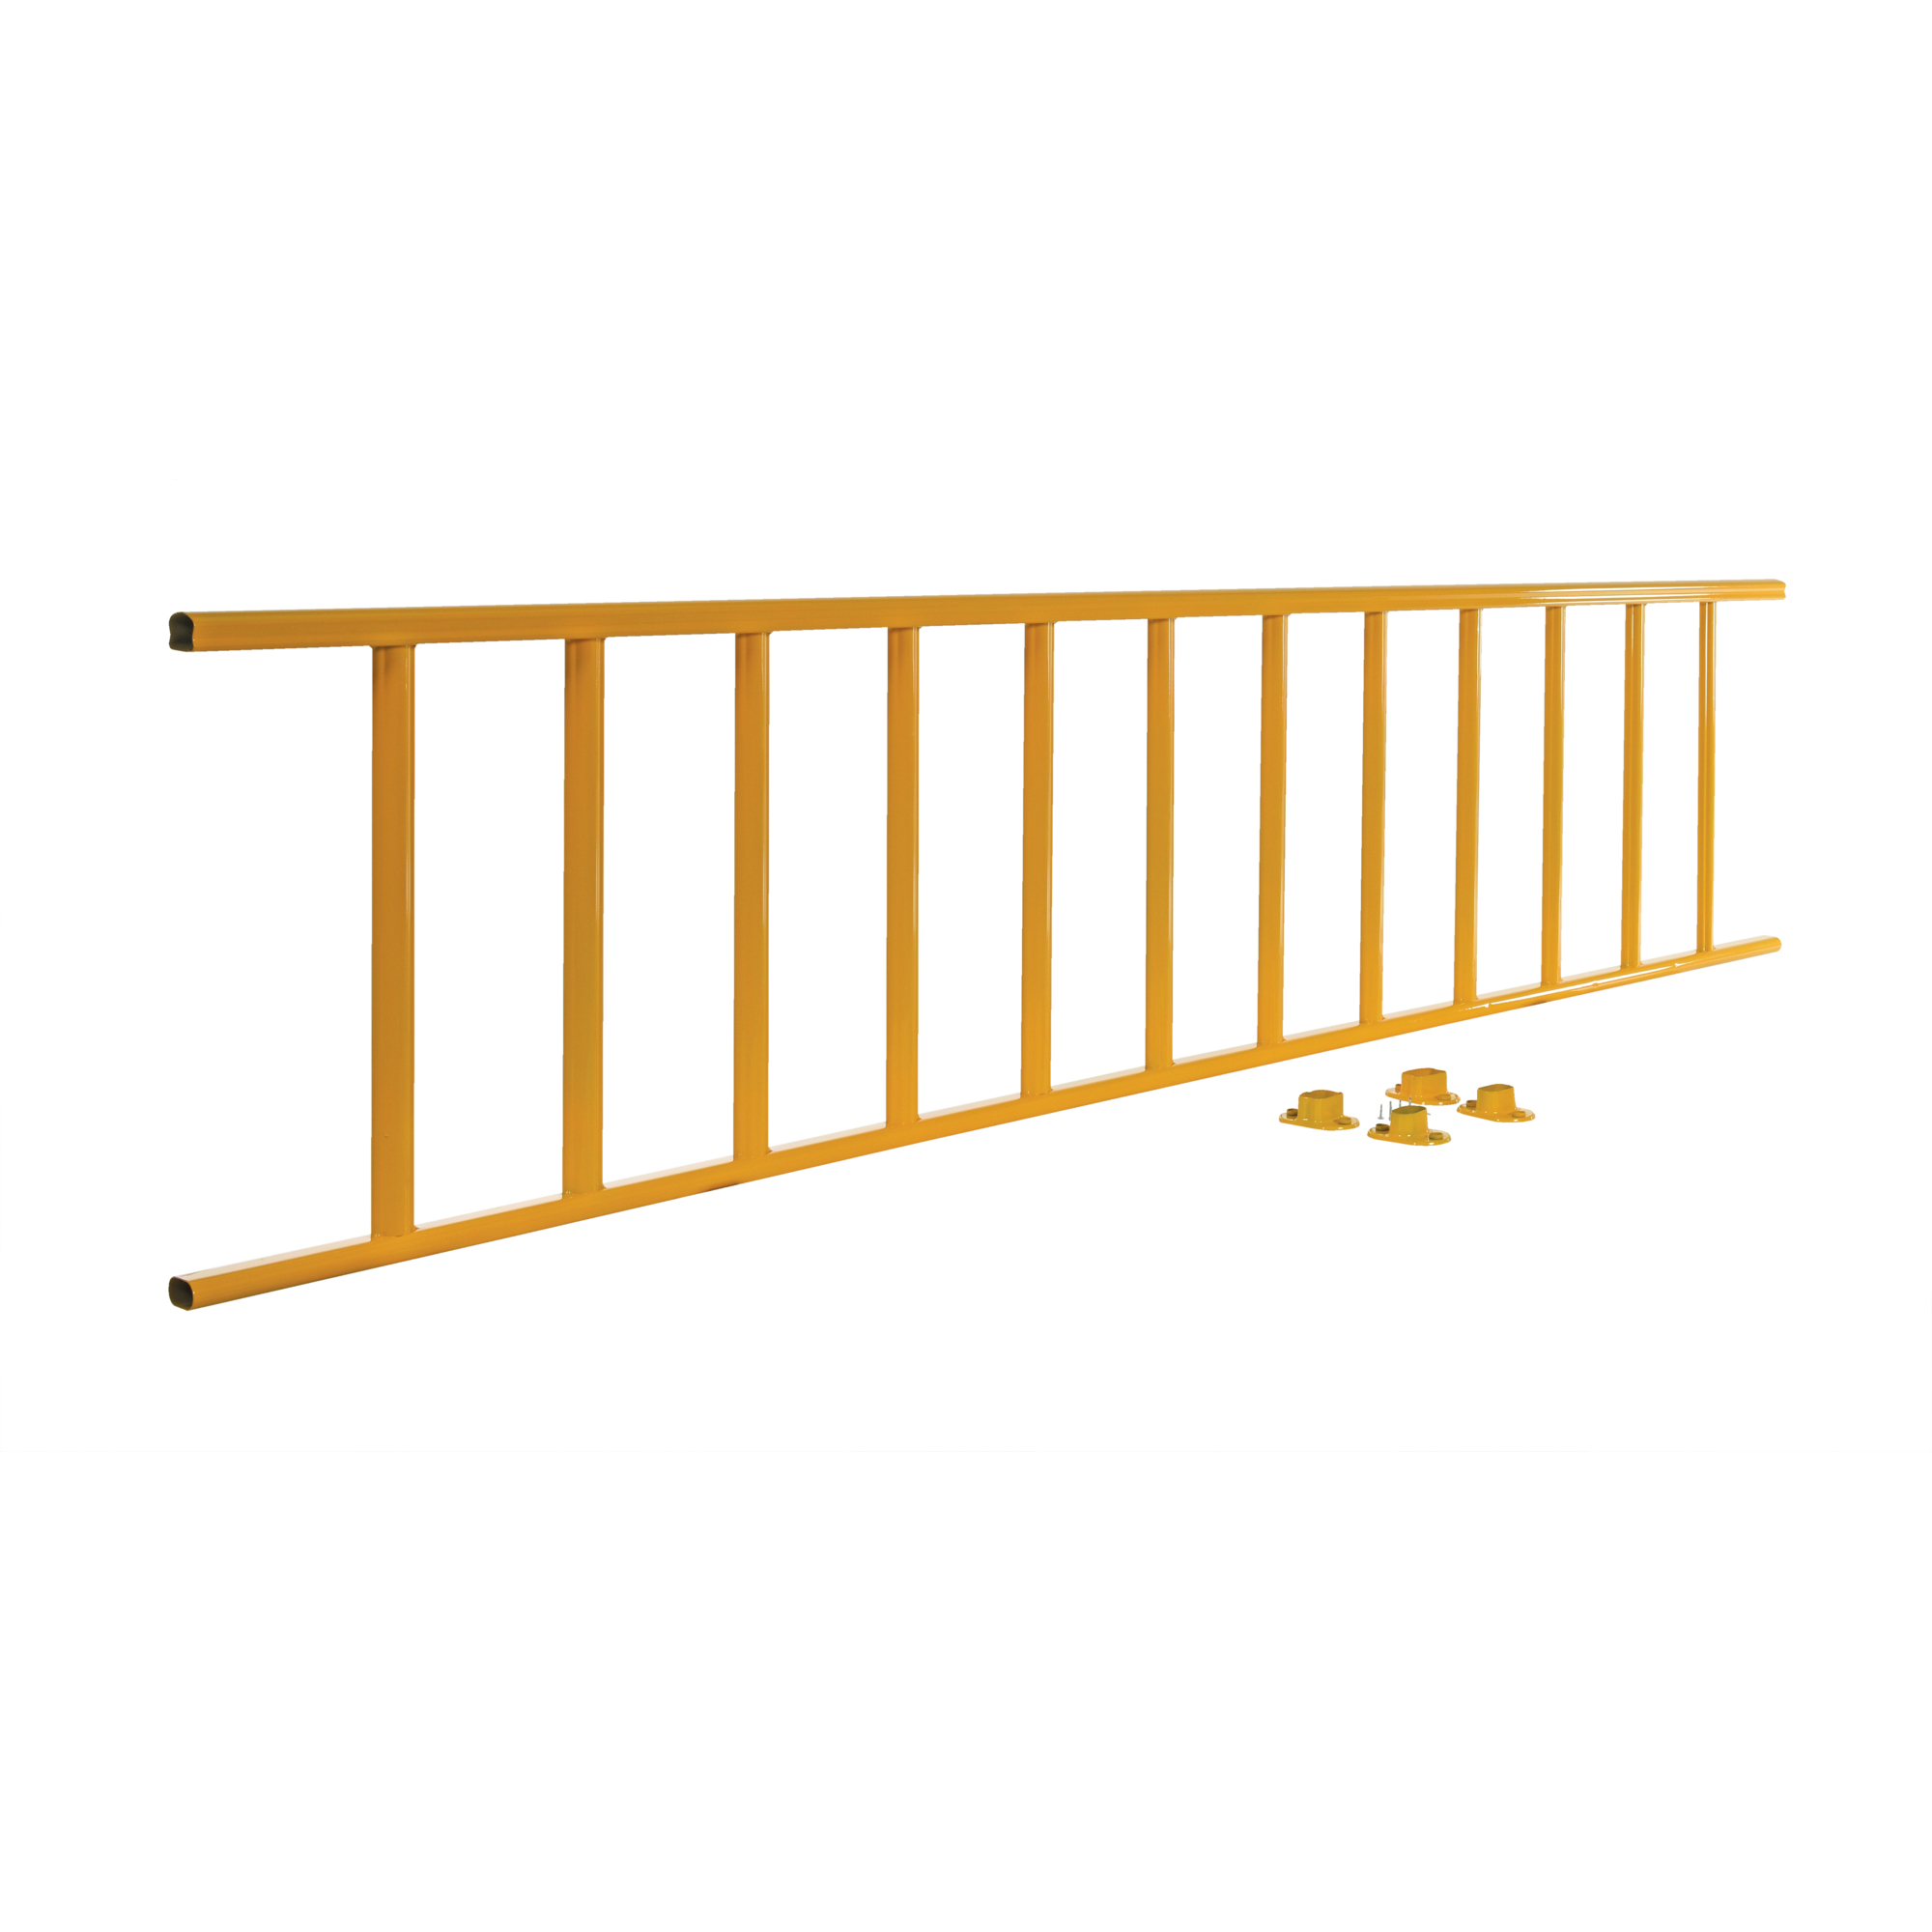 Vestil, Semi-perm barrier railing 120Inch Yellow, Color Yellow, Max. Width 120 in, Material Steel, Model SPR-120-Y